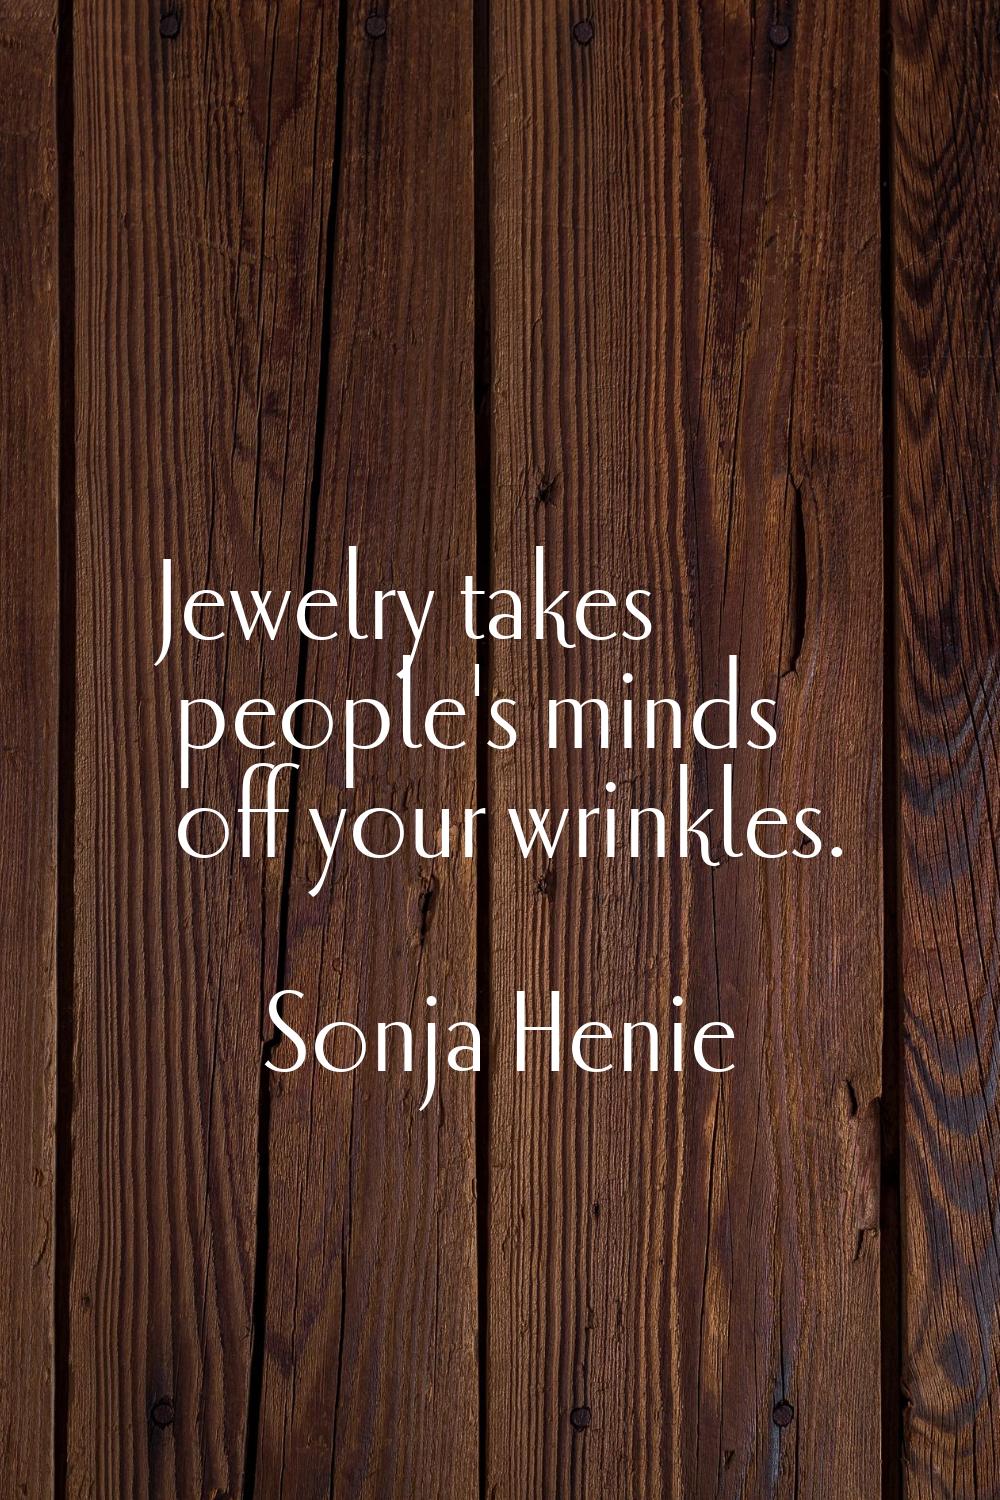 Jewelry takes people's minds off your wrinkles.